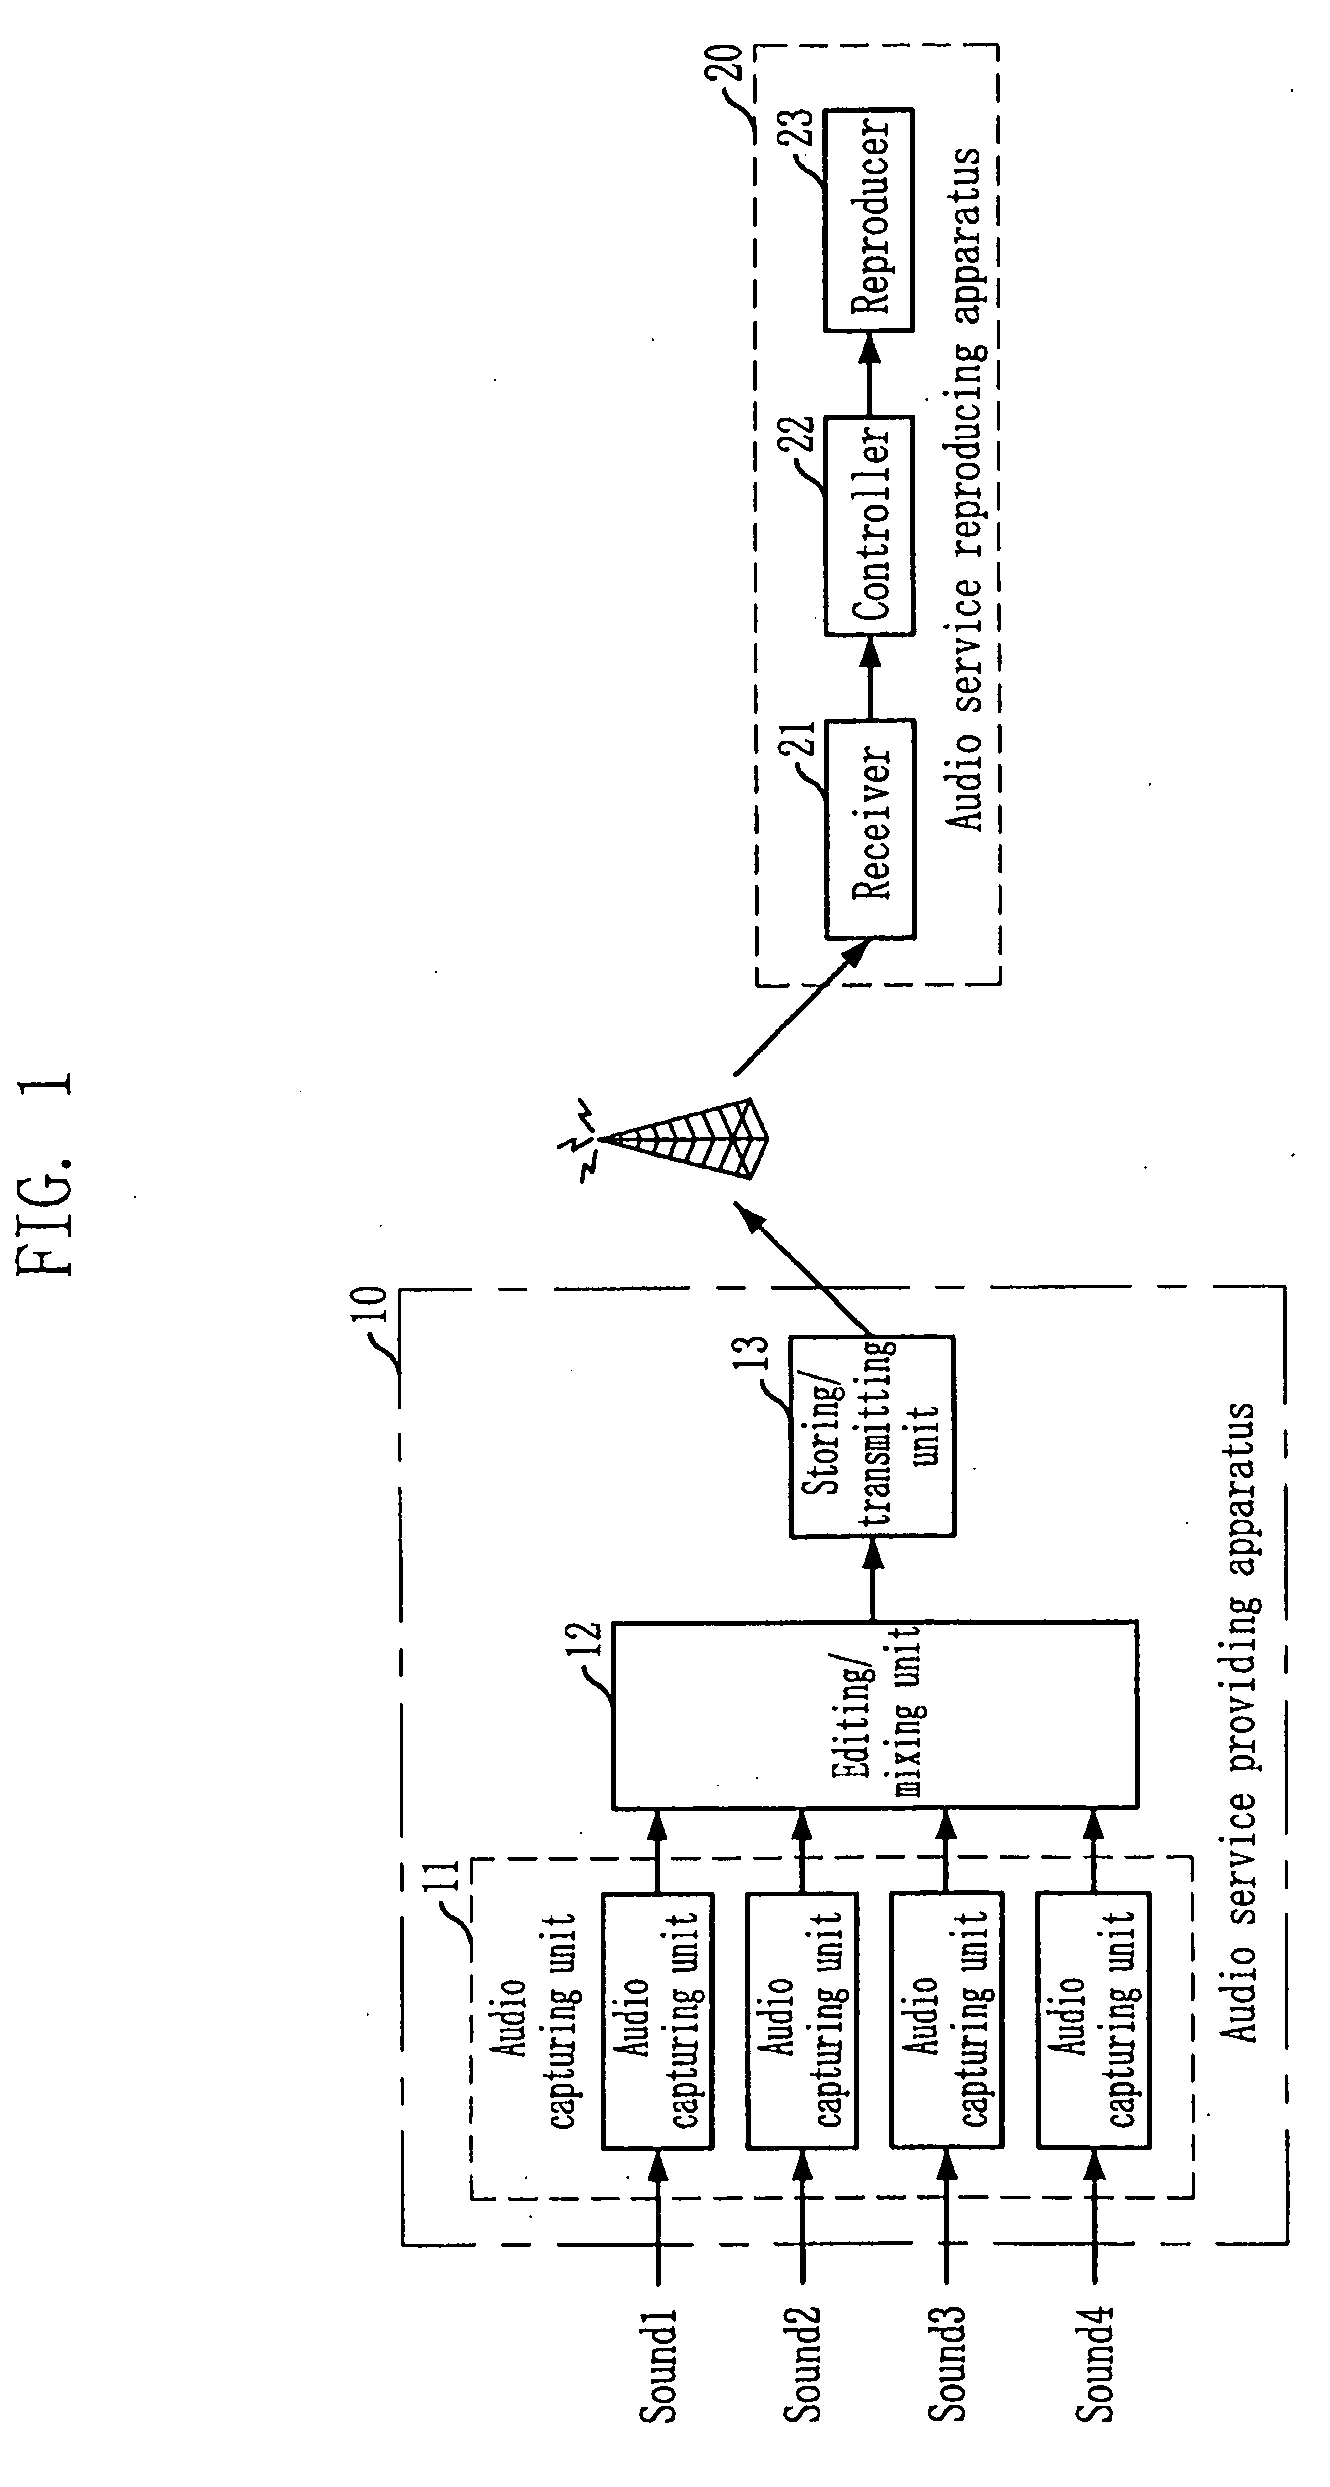 Object-based 3-dimensional audio service system using preset audio scenes